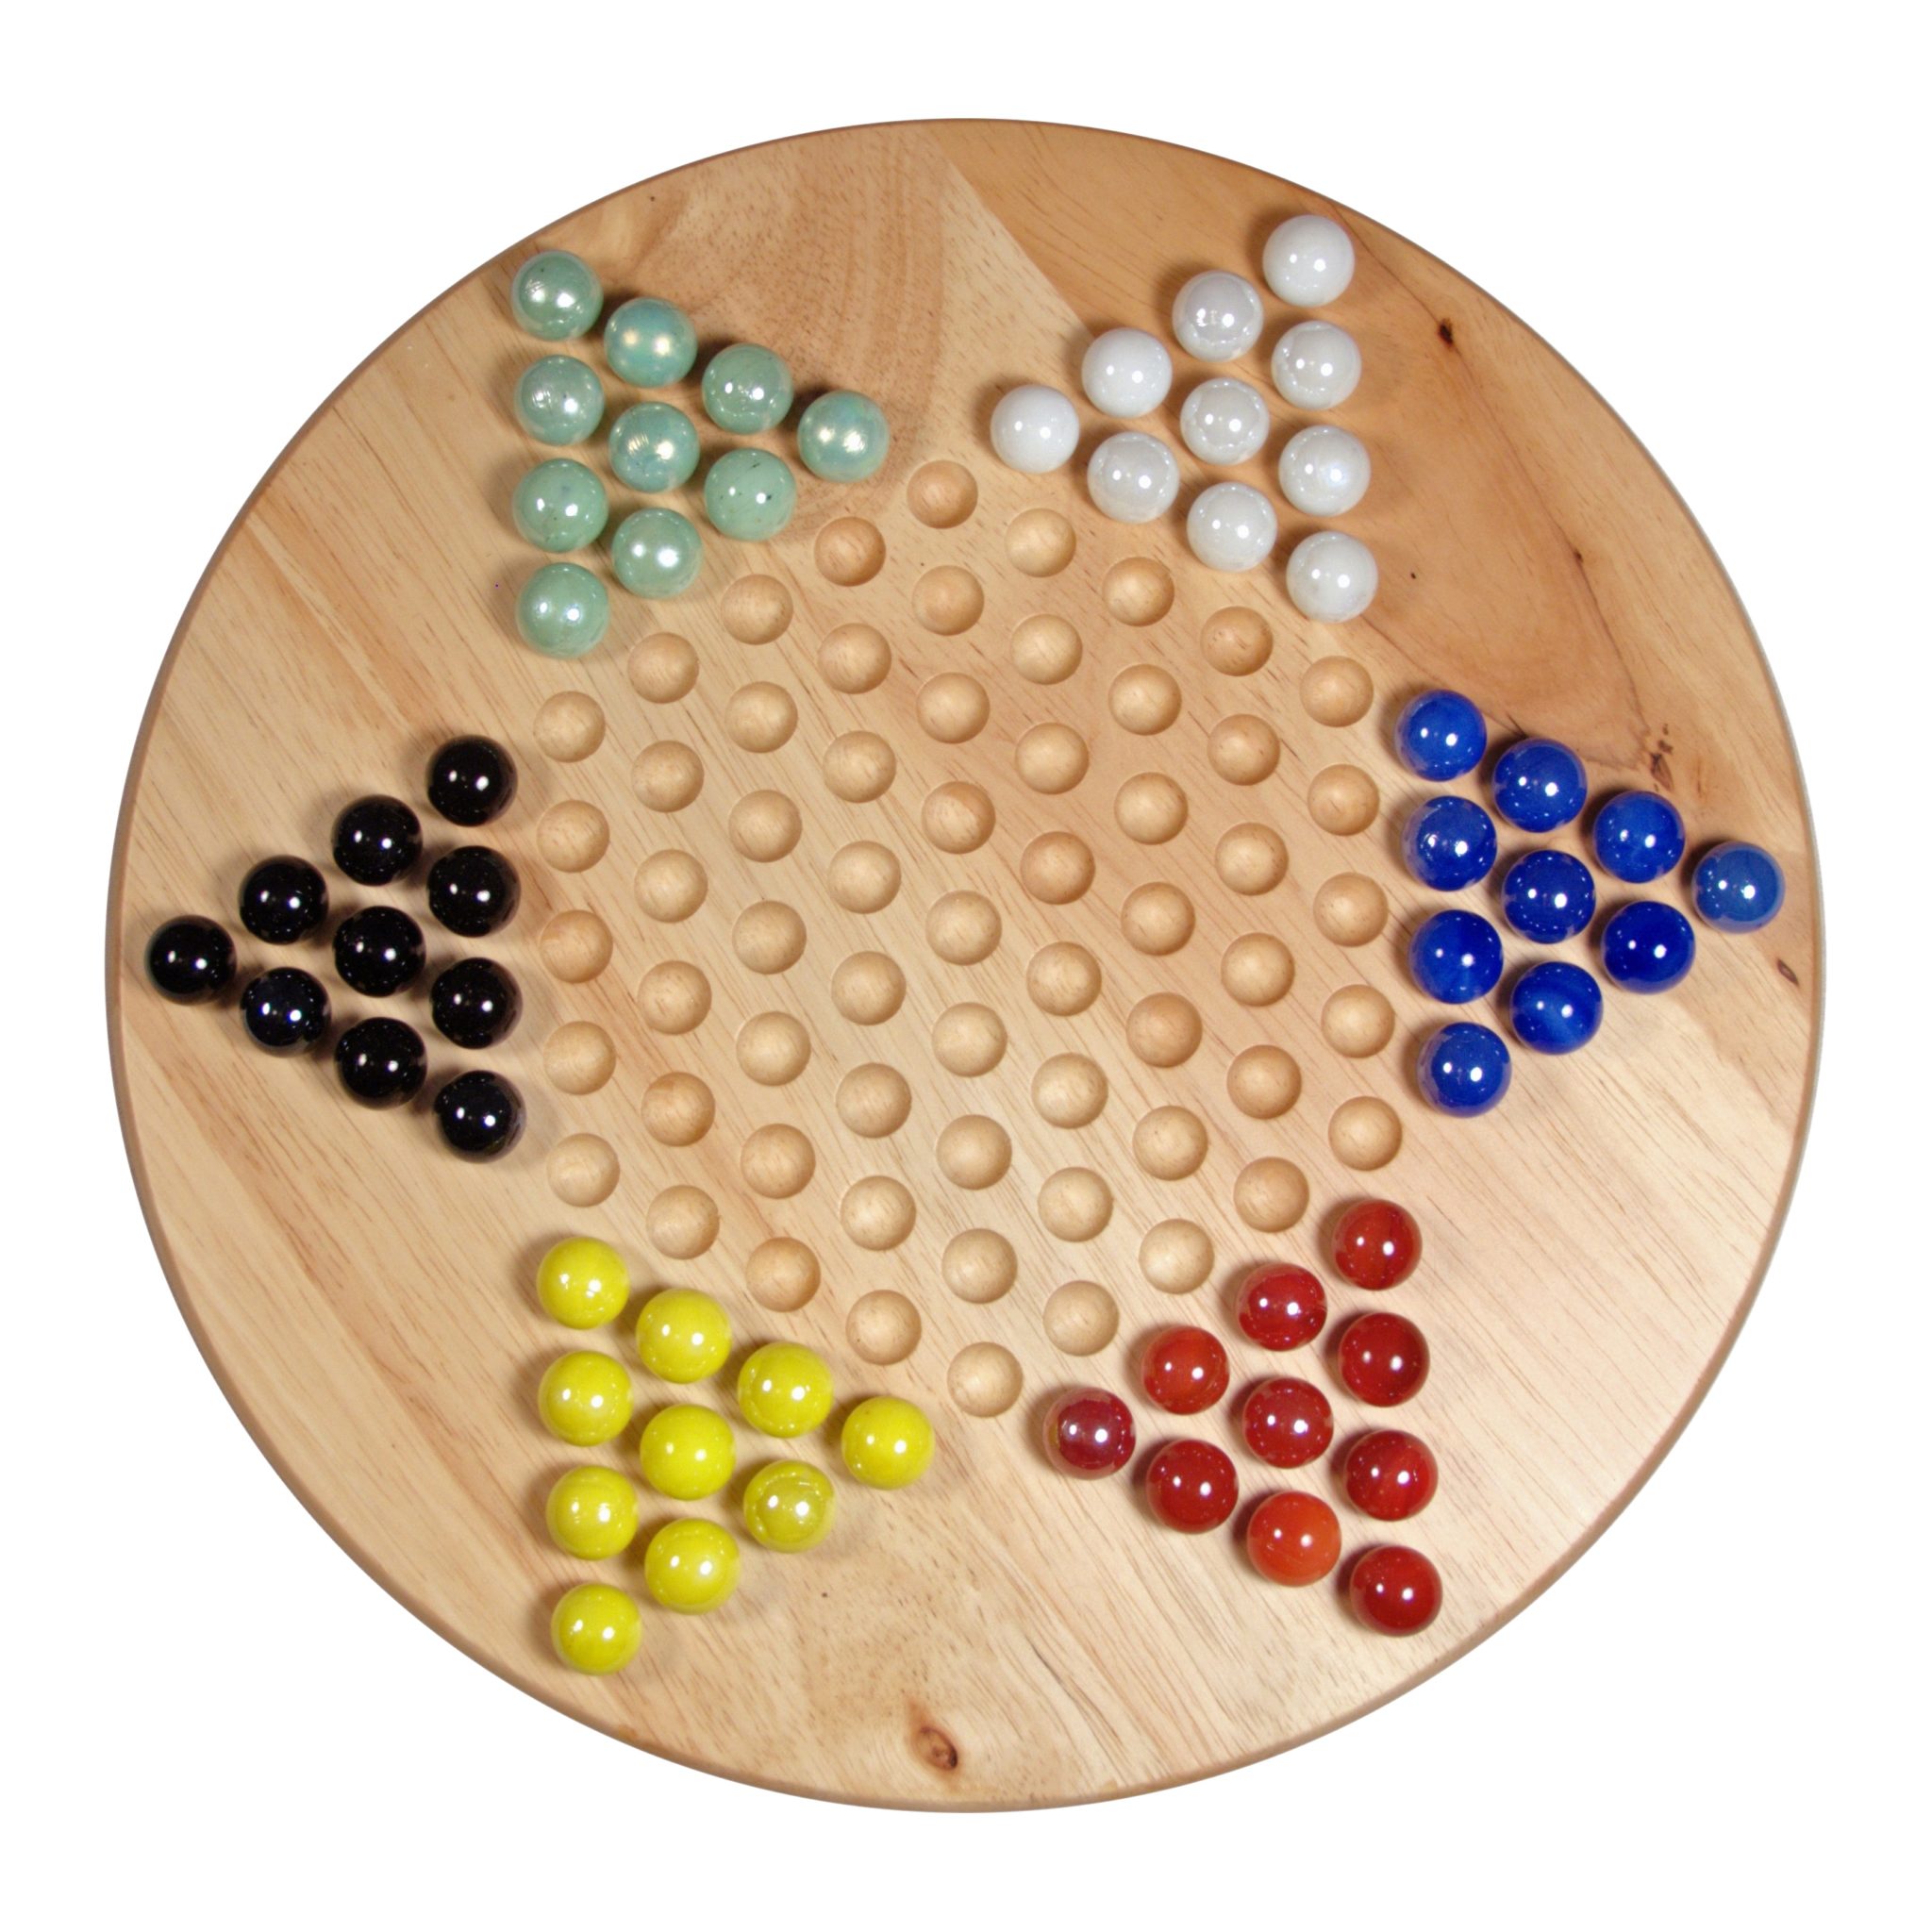 Details about   12" Wooden Chinese Checkers Halma Board Game Set w/ Drawers and Glass Marbles